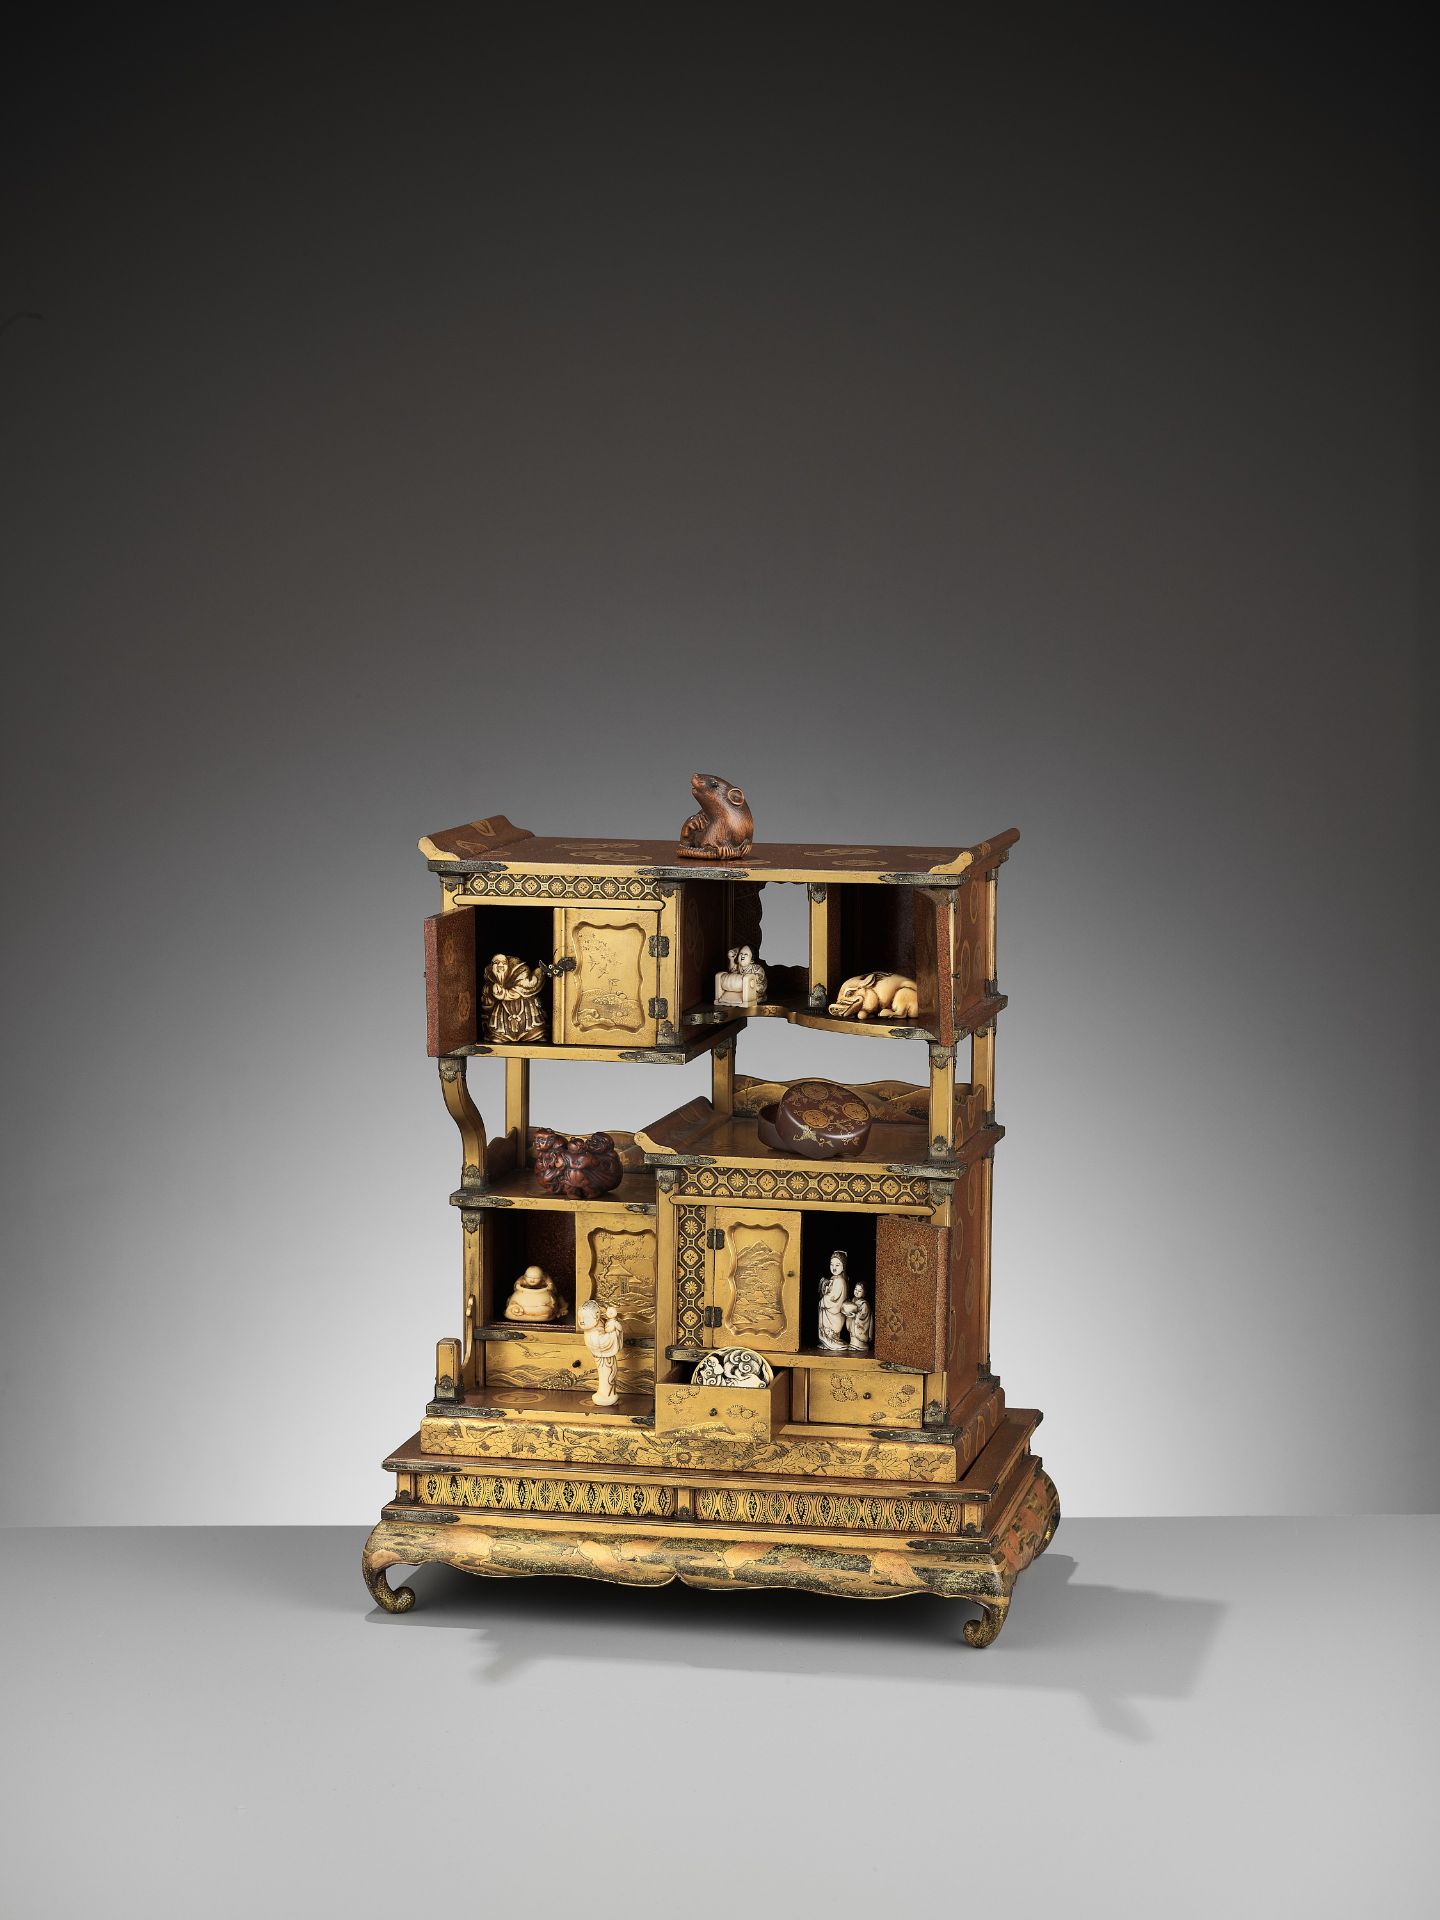 A SUPERB AND RARE SMALL GOLD-LACQUER SHODANA (DISPLAY CABINET) WITH STAND - Image 8 of 18